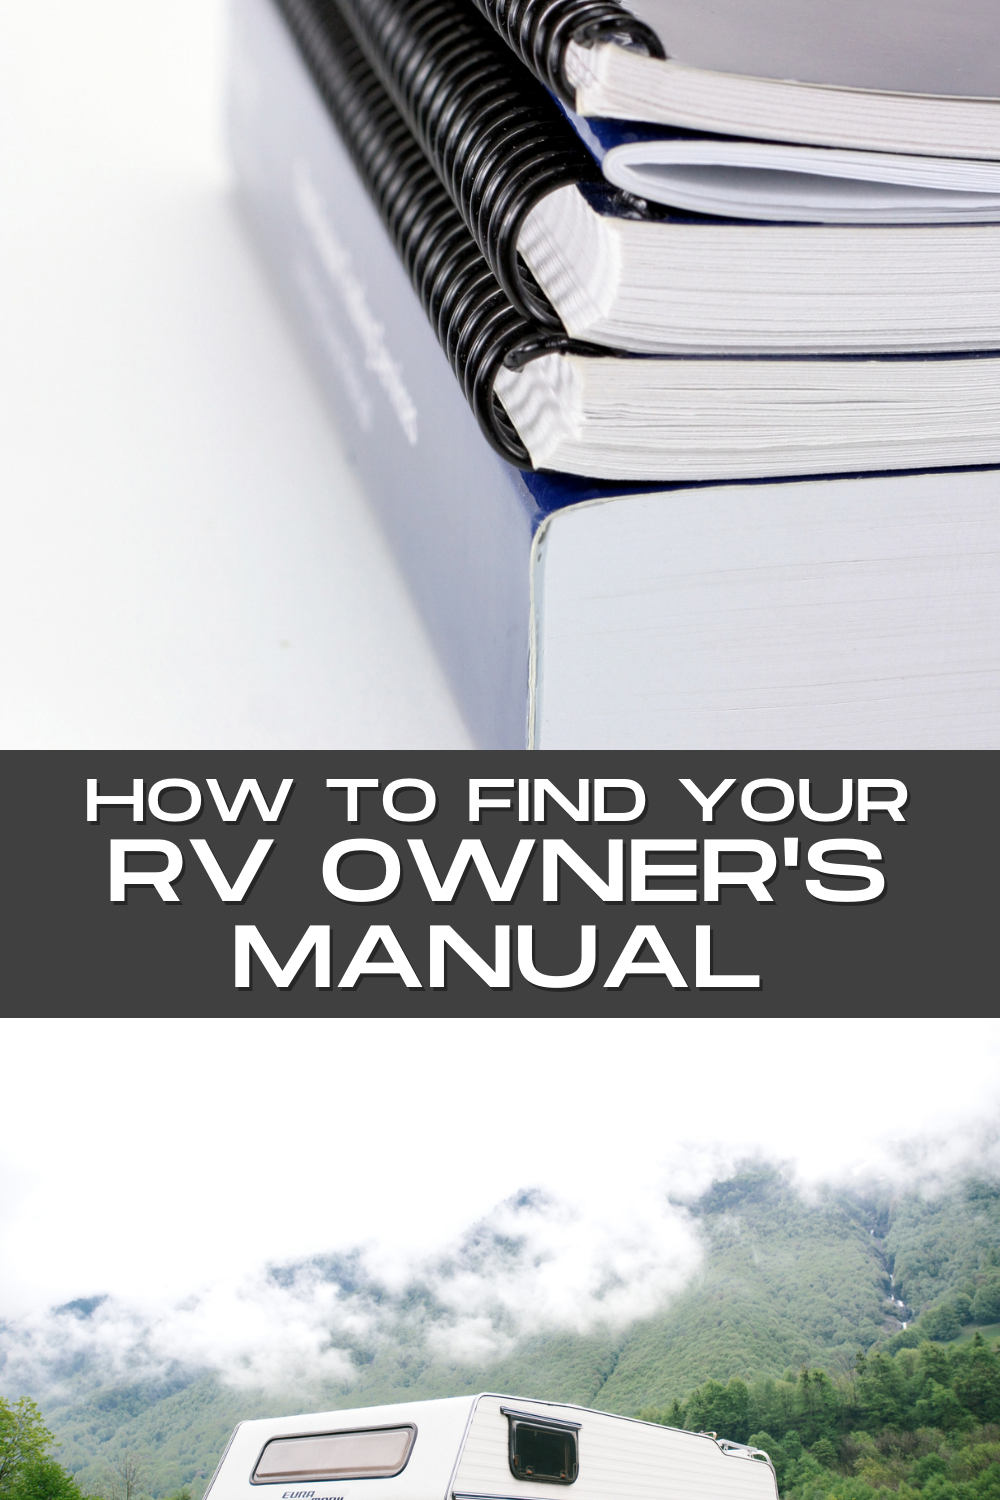 A stack of manuals and an RV that reads "How to find your RV owner's manual"